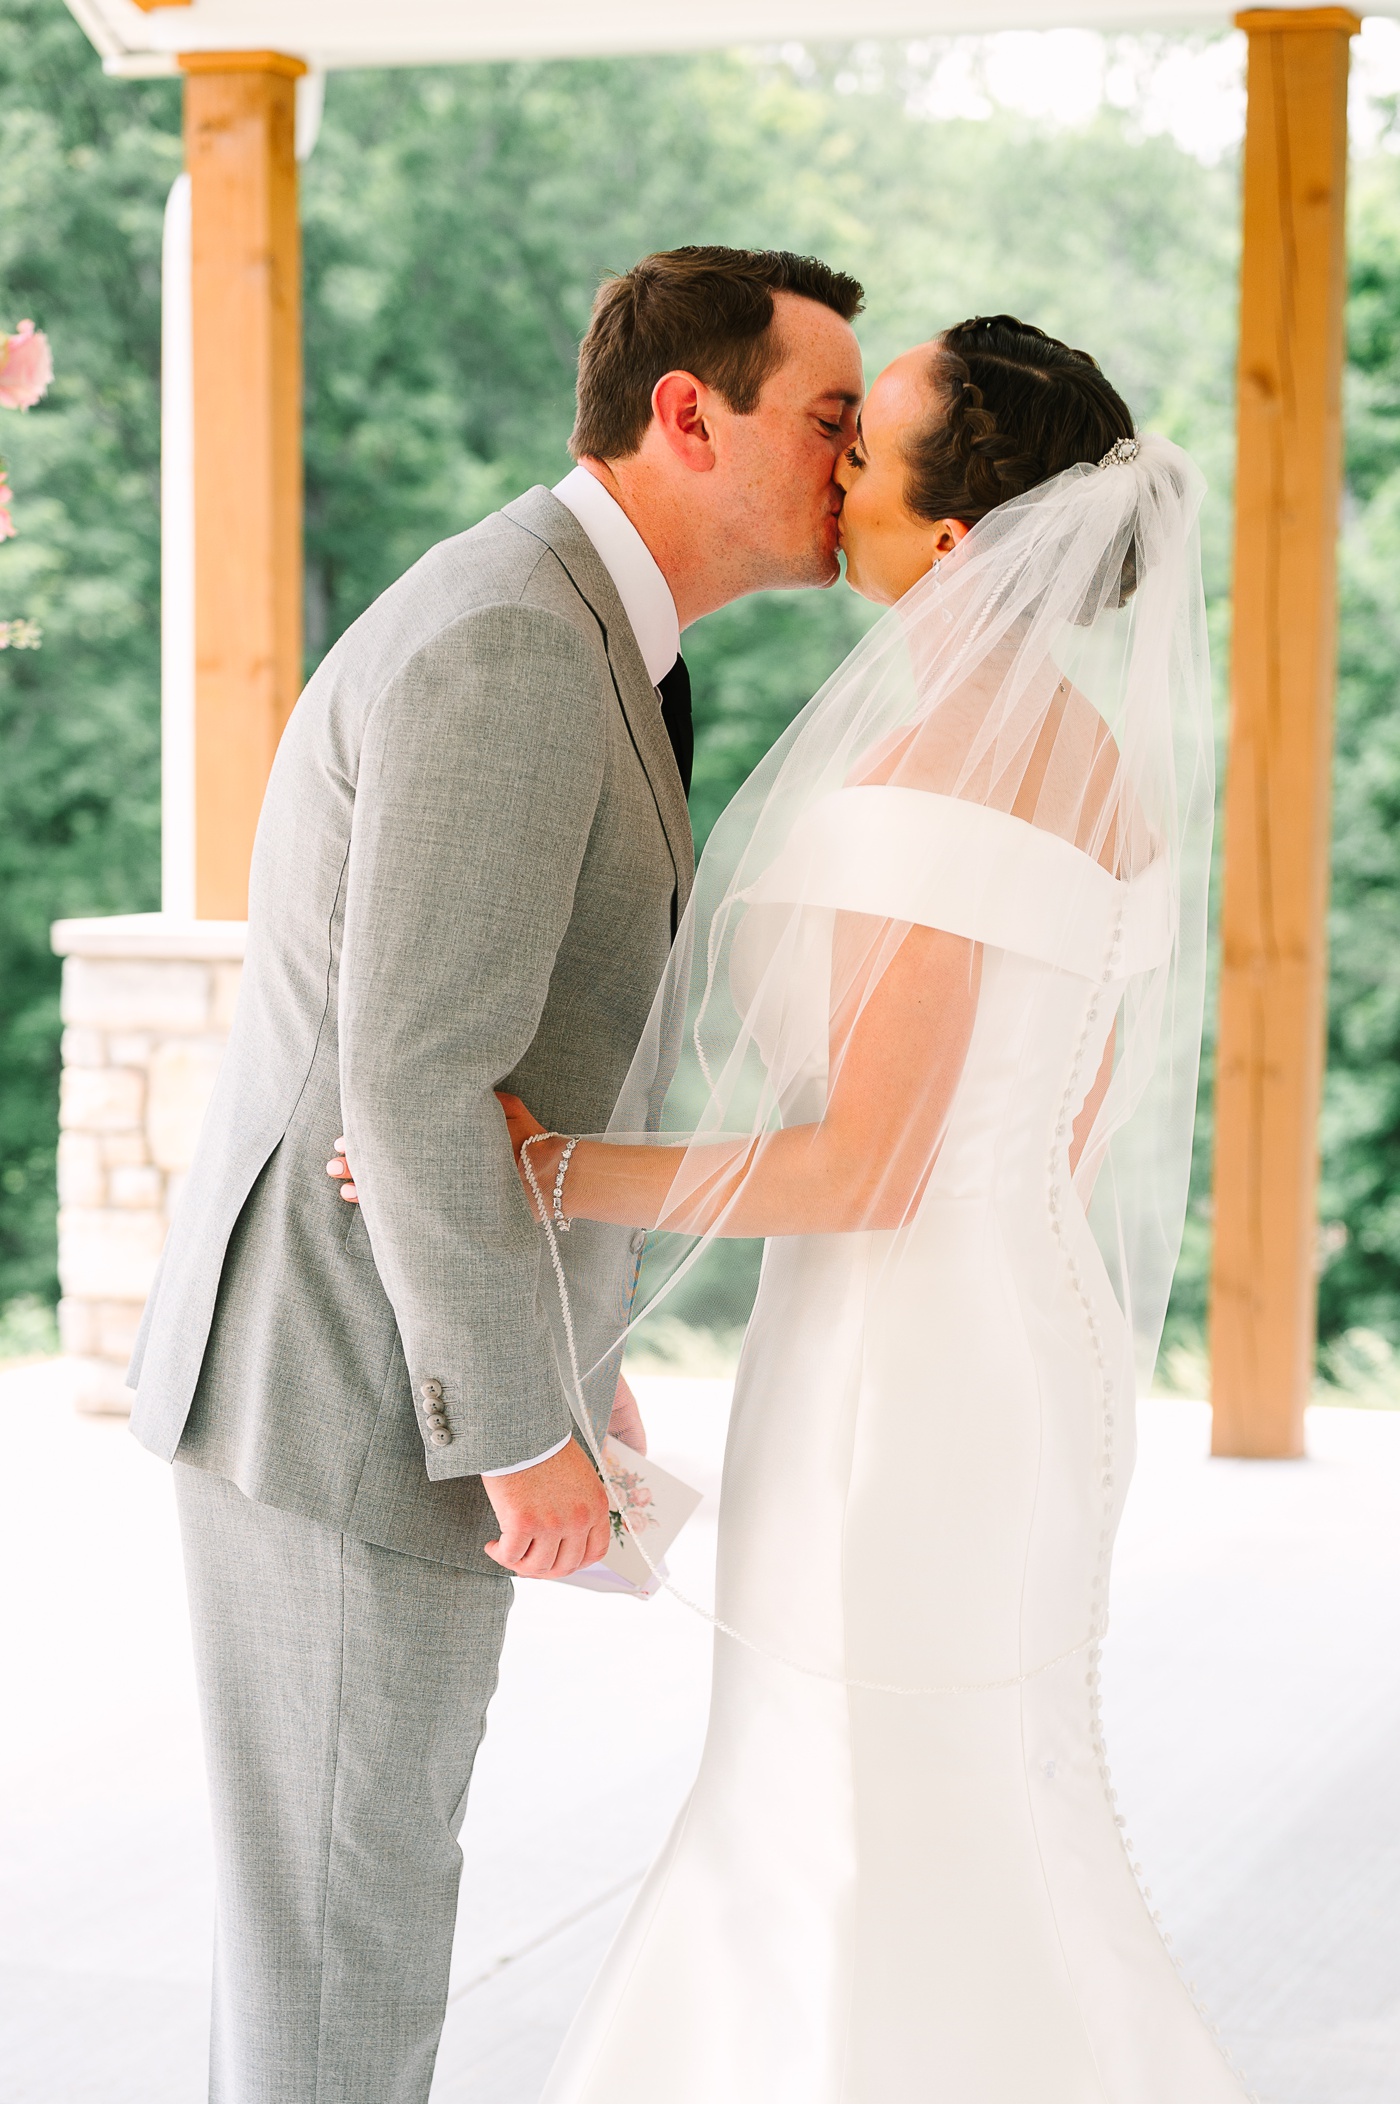 Mika LH - Indianapolis, IN Wedding Photographer